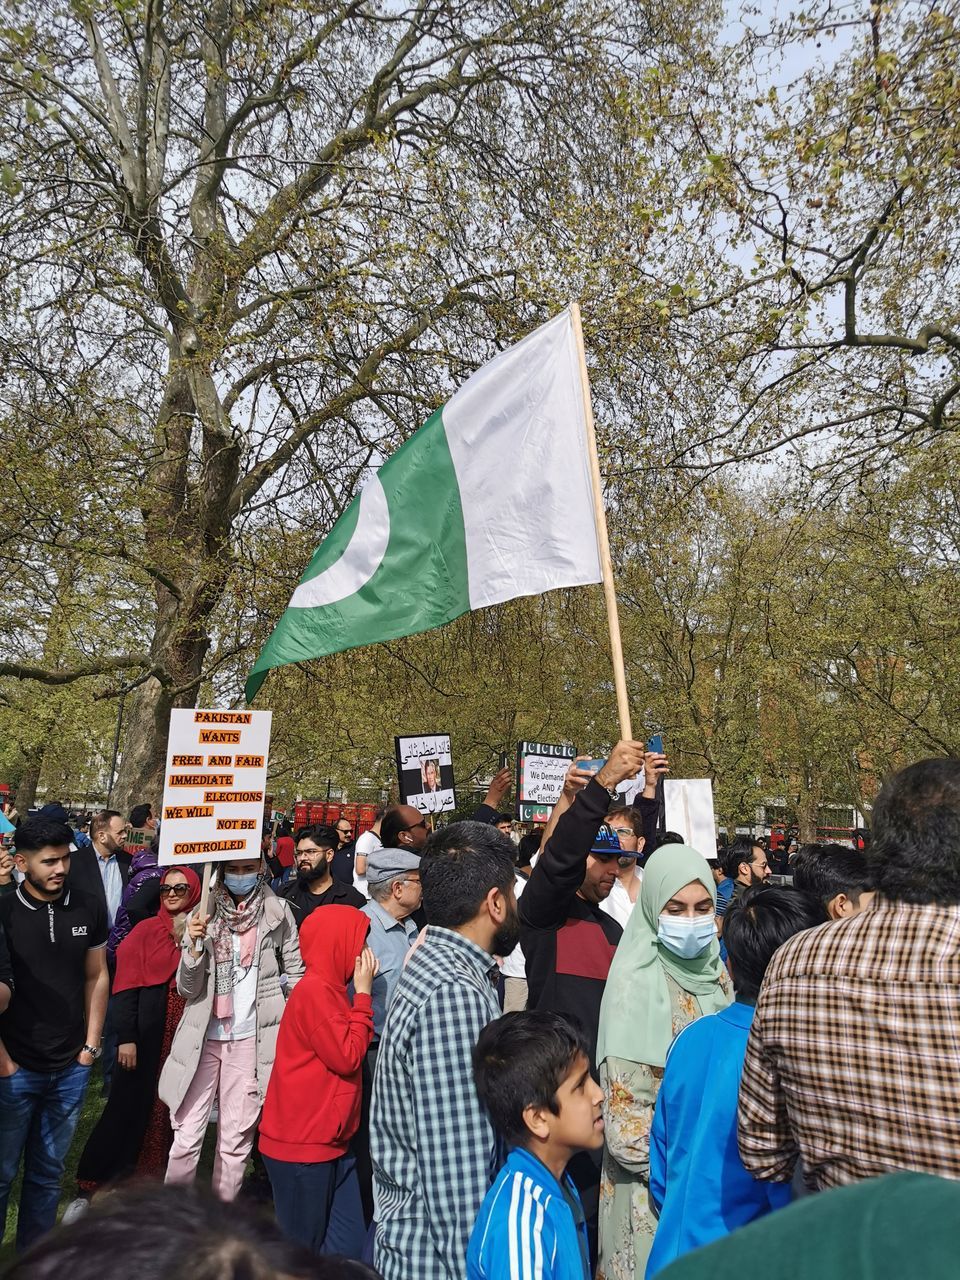 group of people, crowd, flag, tree, large group of people, patriotism, men, women, plant, adult, day, nature, protest, outdoors, protestor, lifestyles, togetherness, event, celebration